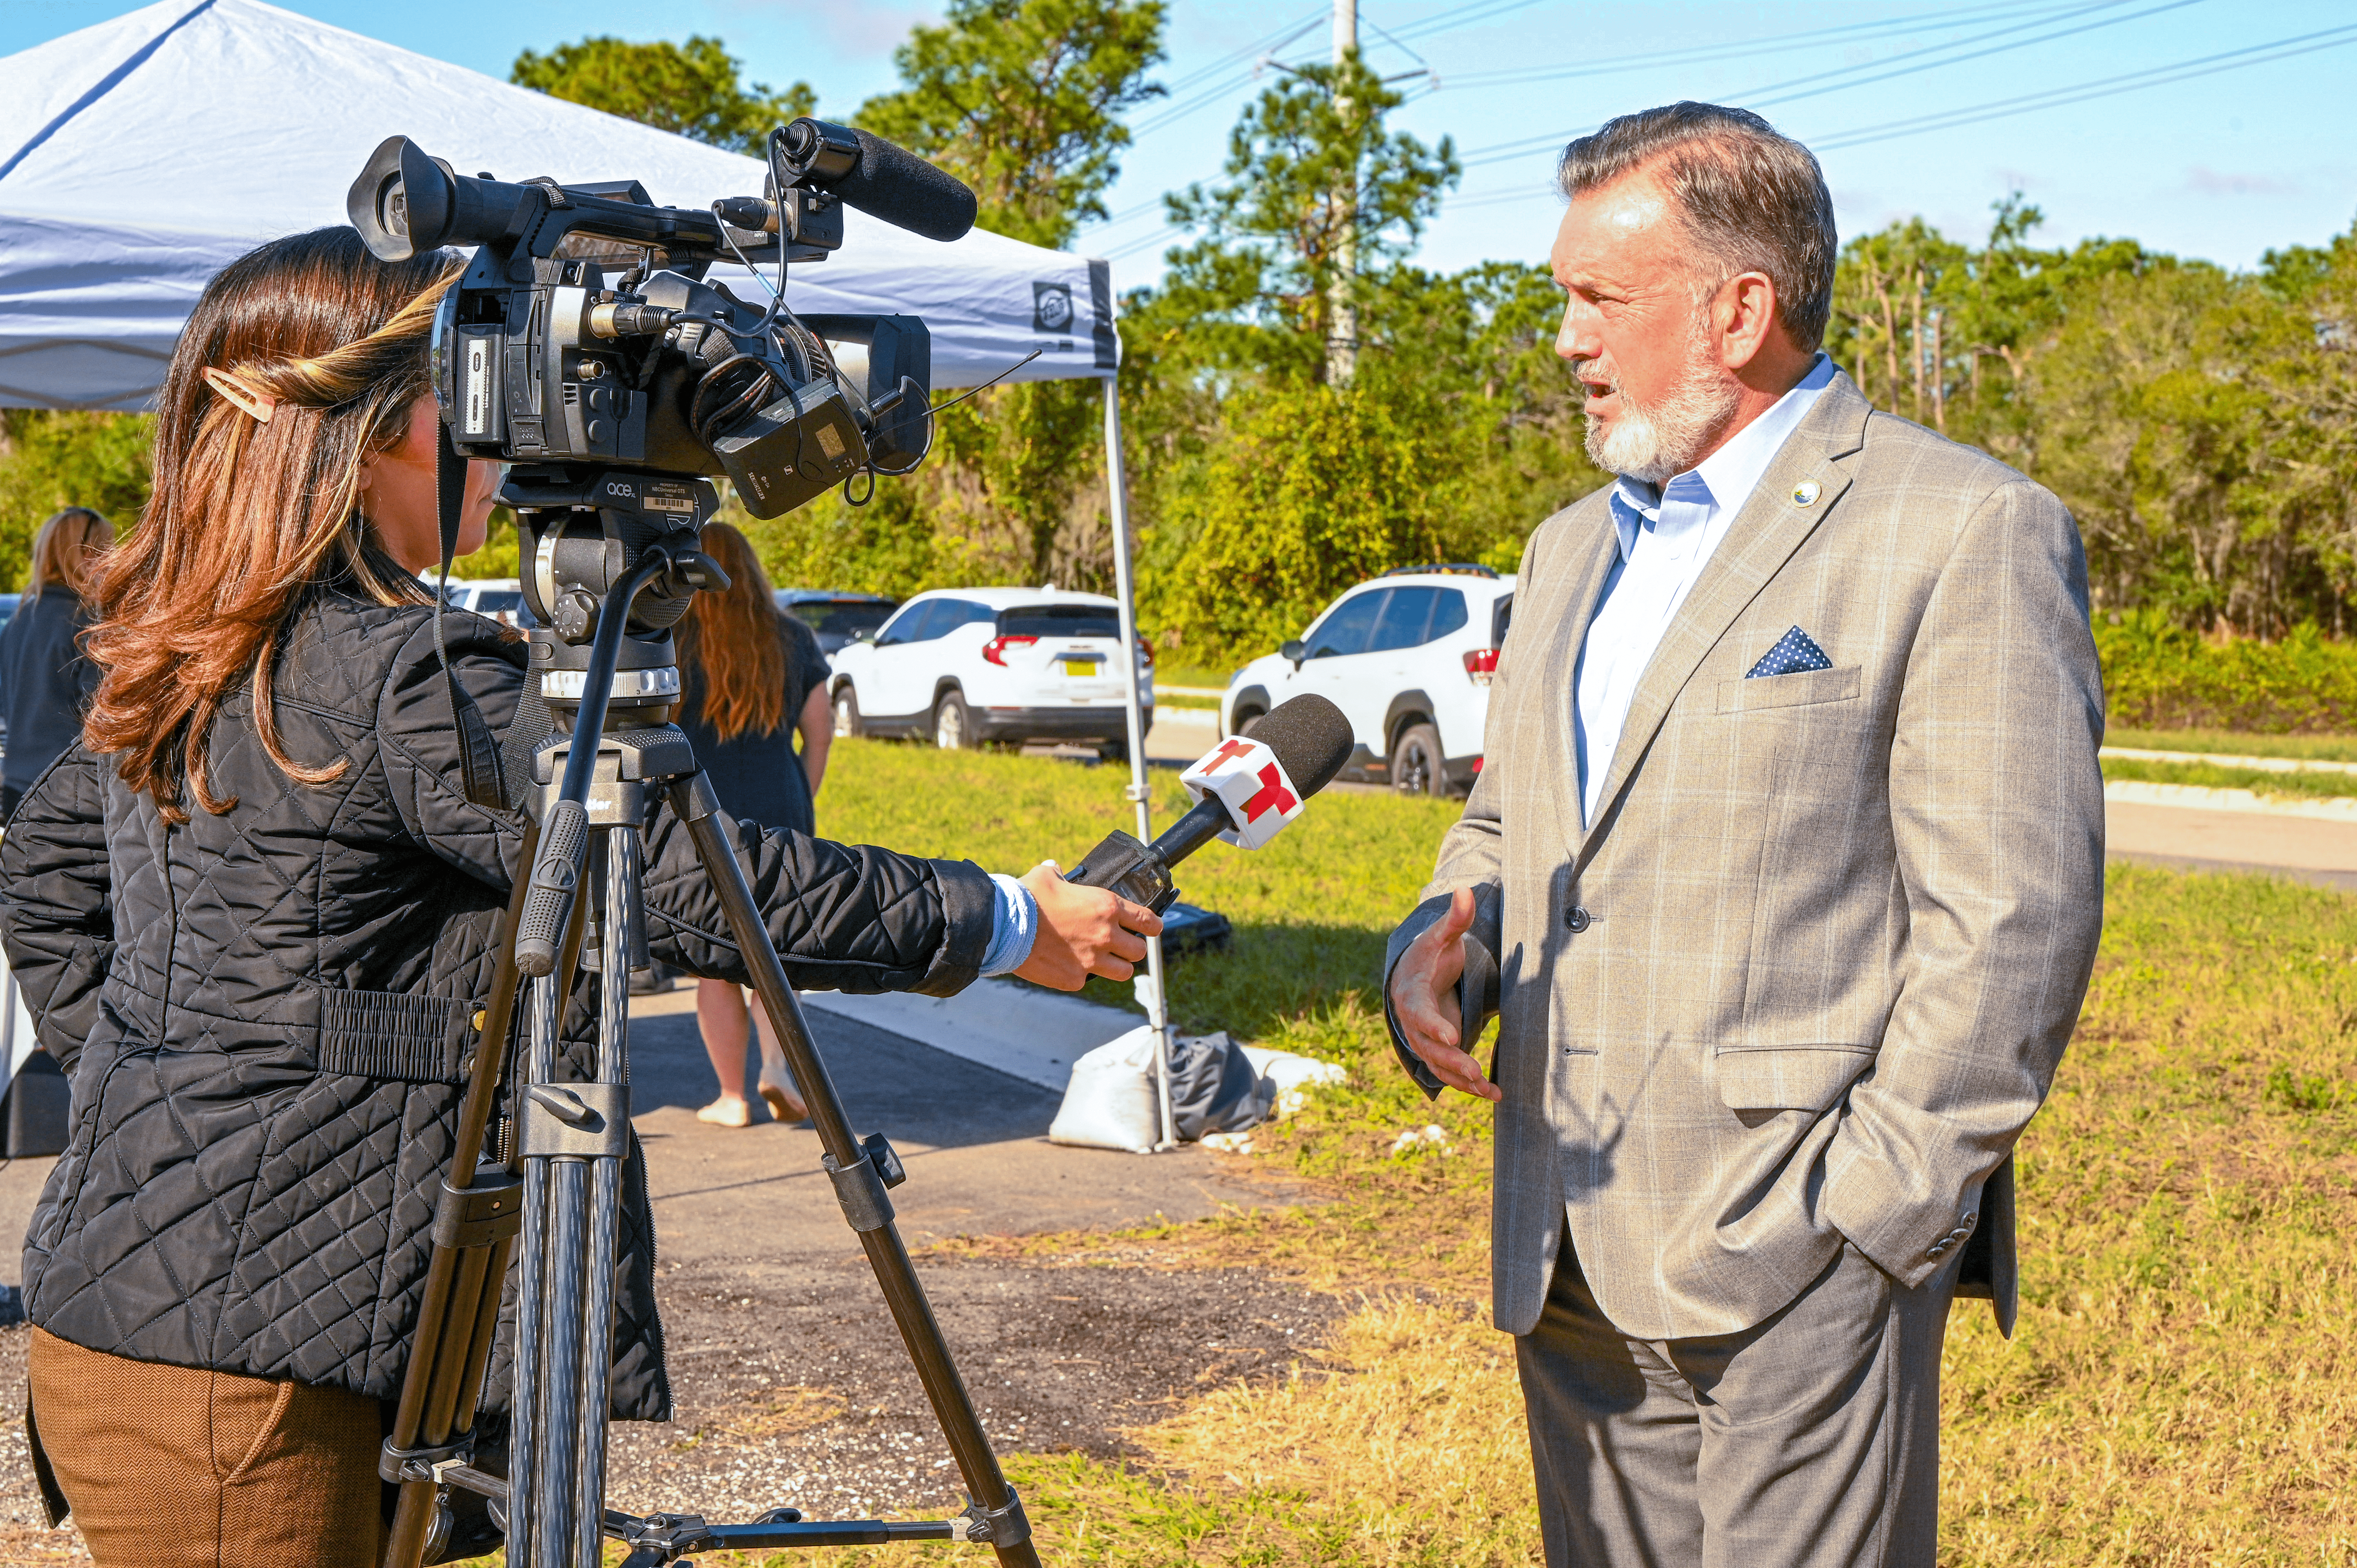 A TV reporter interviewing a man about the groundbreaking